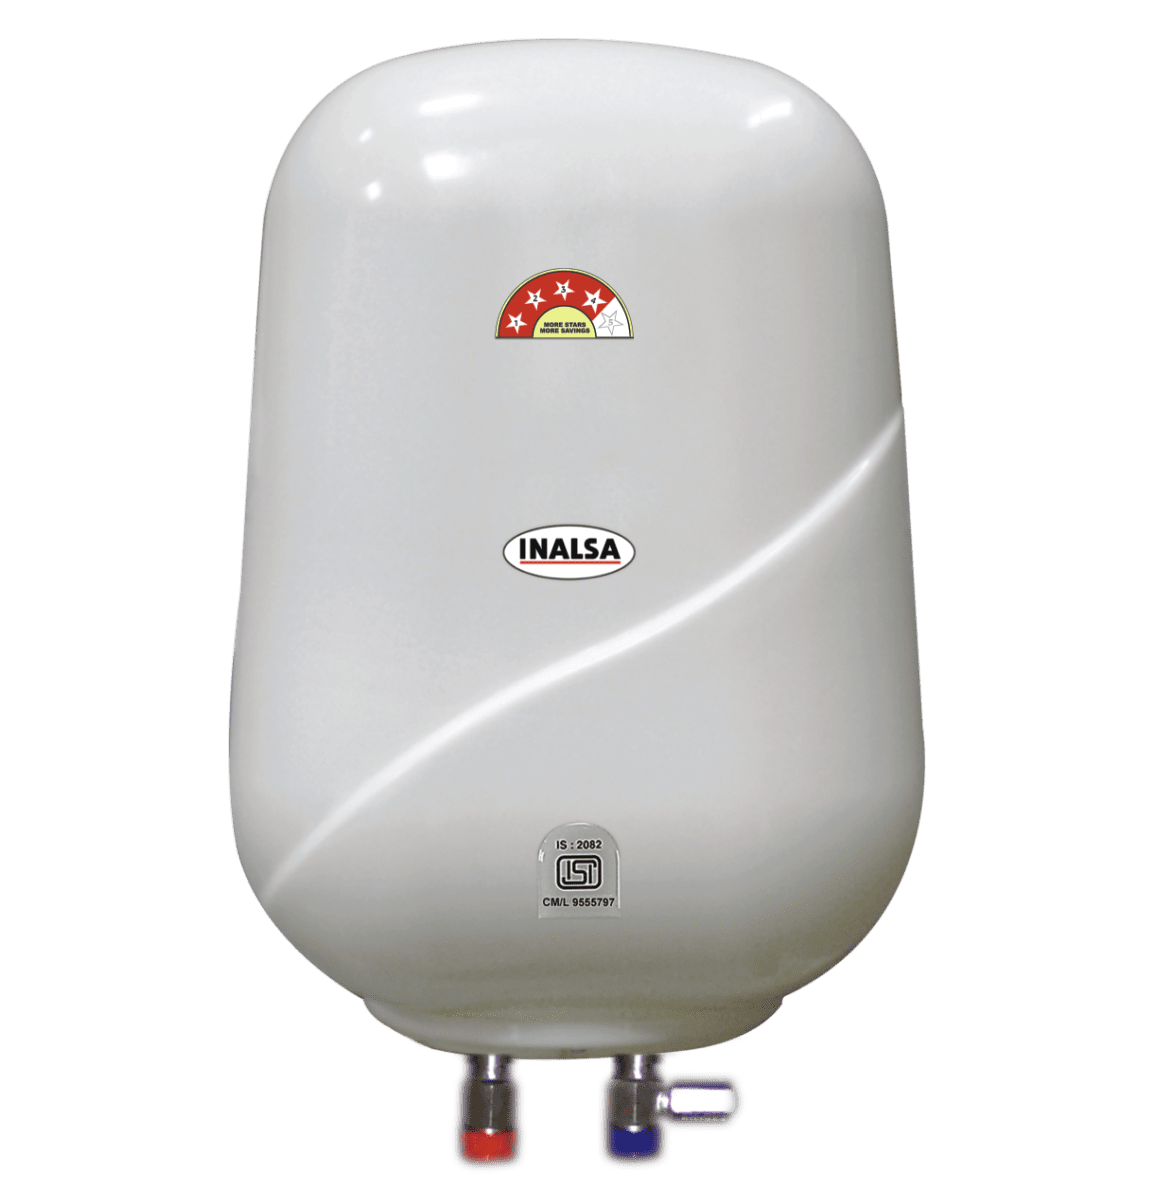 Inalsa Psg Storage water Heater On Dillimall.Com